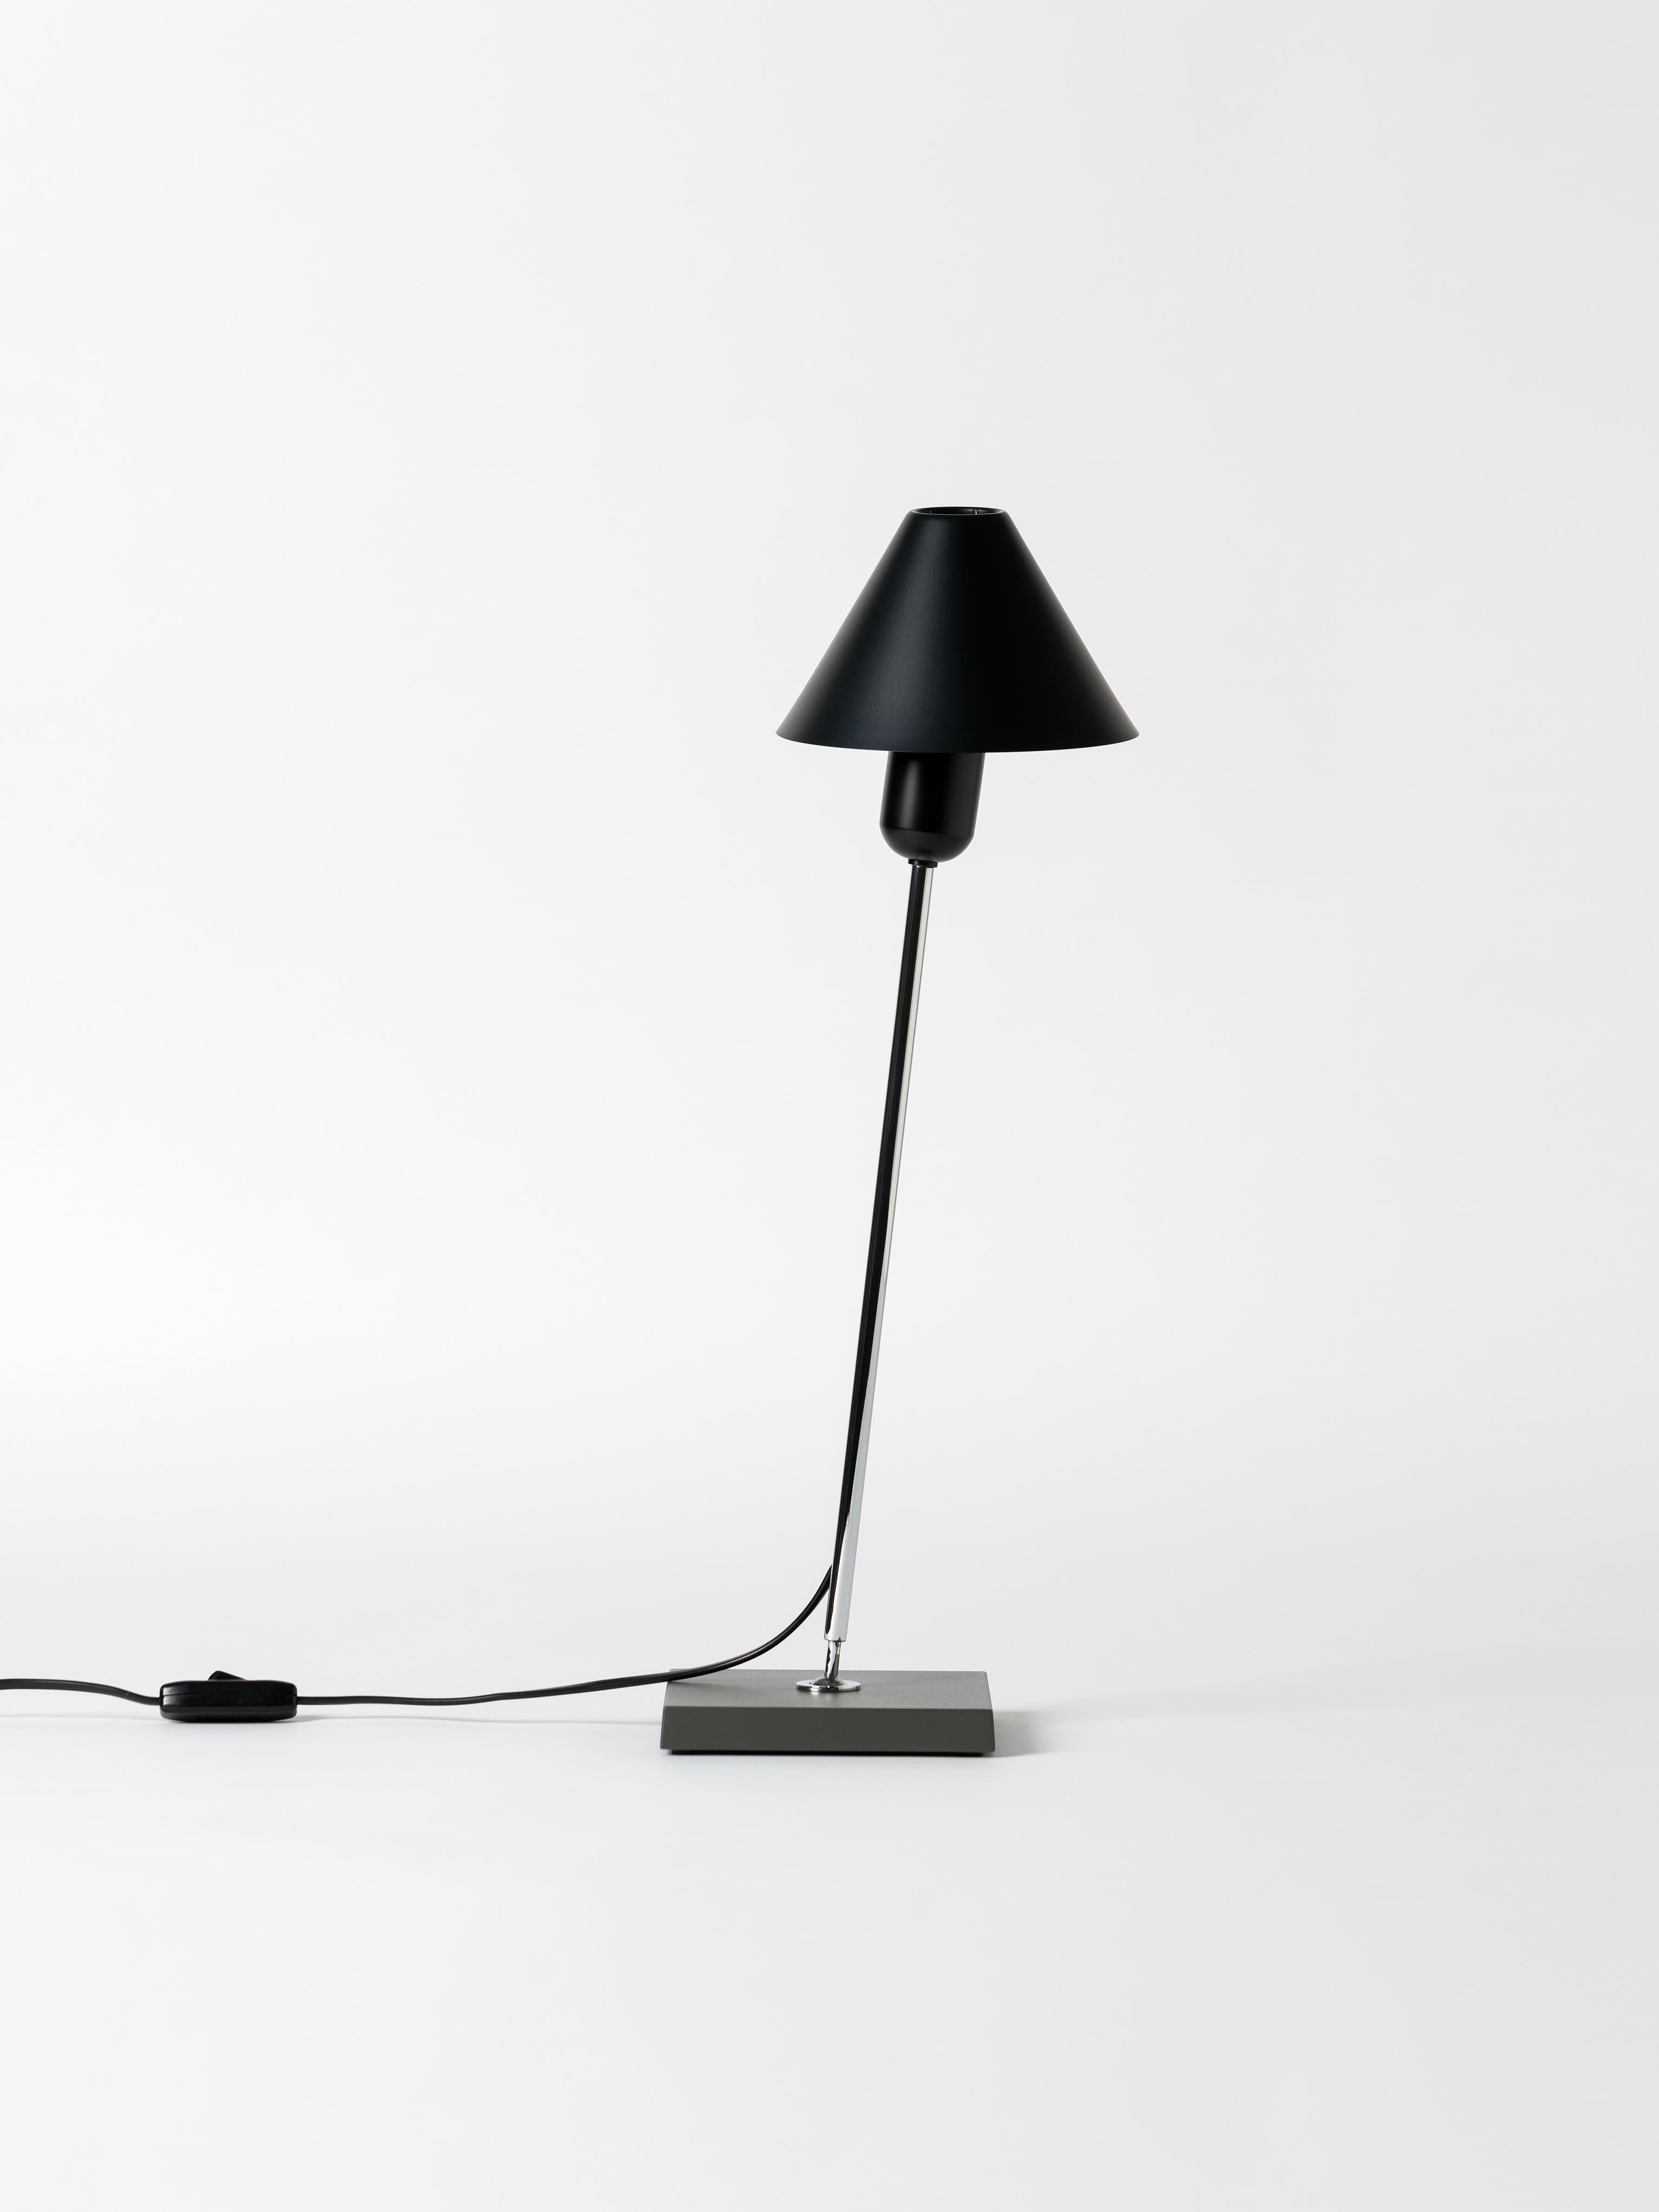 Black Gira table lamp by Miguel Milá
Dimensions: D 16 x H 54 cm
Materials: Aluminum.
Available in 3 colors: Aluminum, black and brass.

The Gira lamp has all the simplicity and the profile of a classic. This lamp encapsulates all the essential